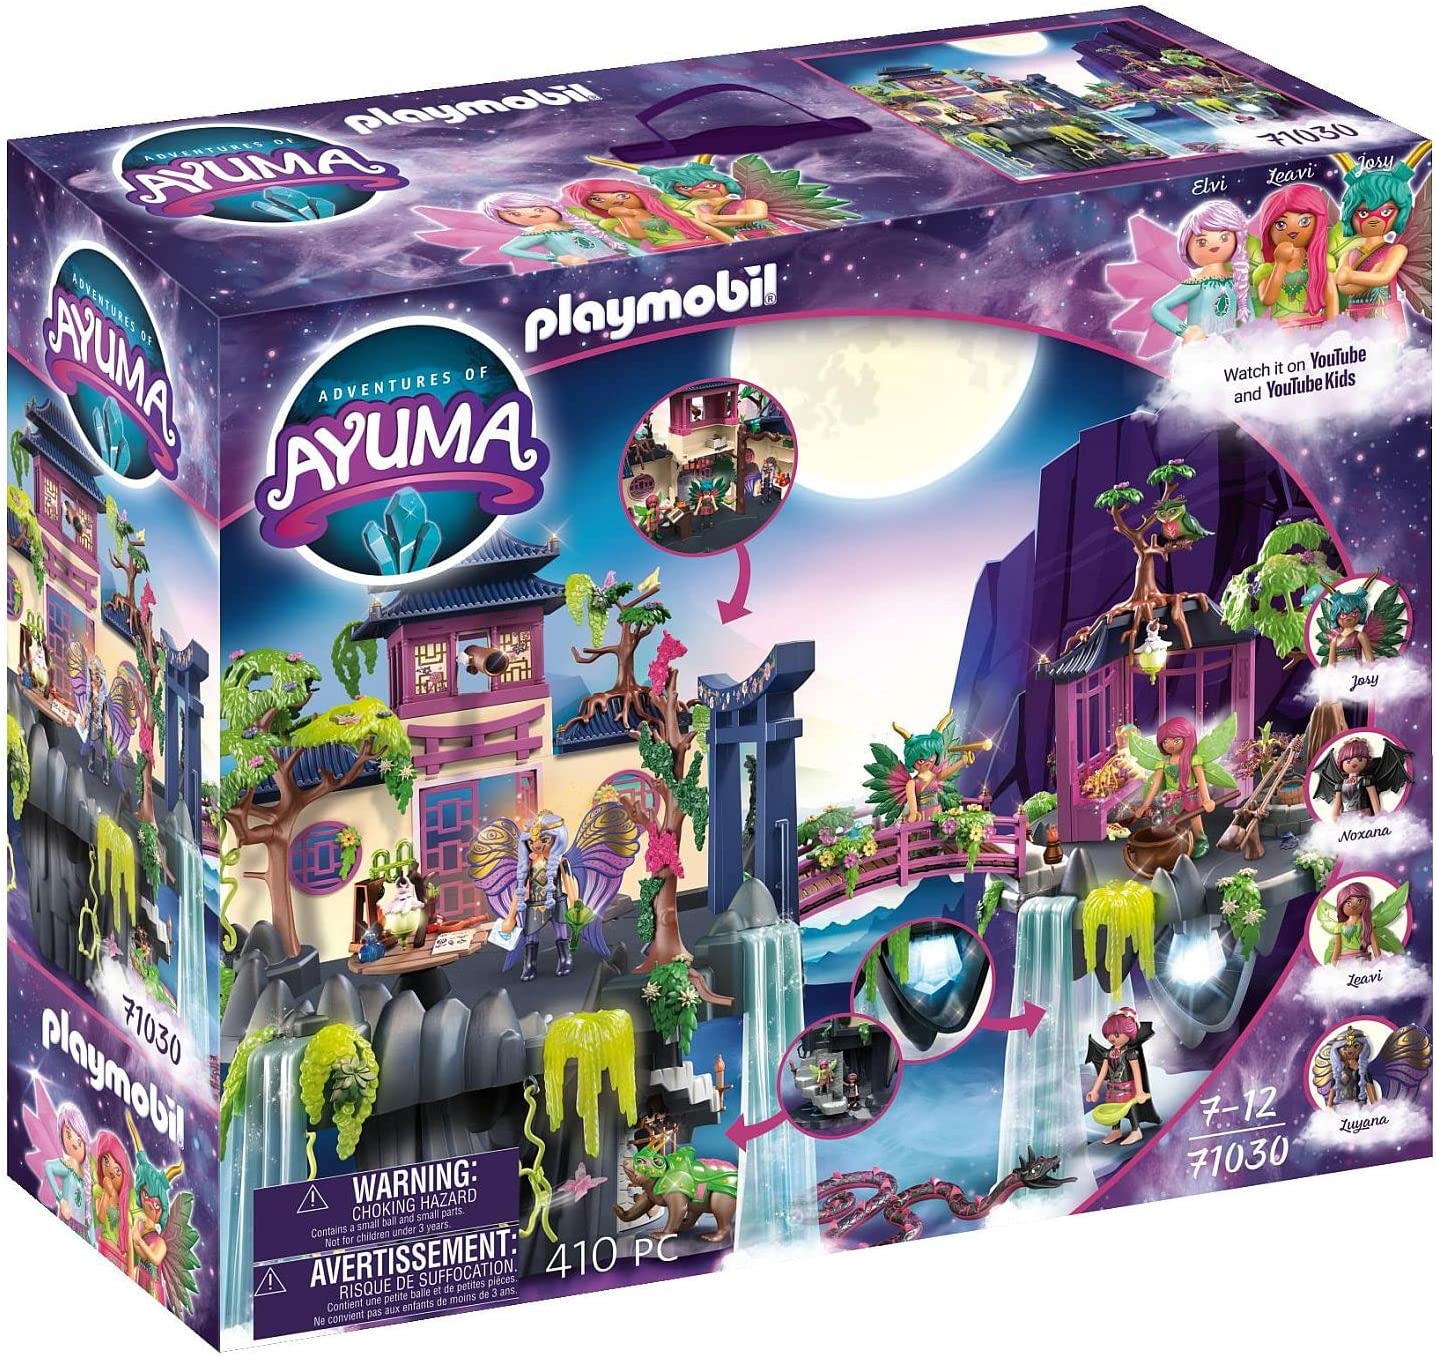 PLAYMOBIL Adventures of Ayuma 71030 Fairy Academy Includes Toy Fairies with Moving Fairy Wings Fairy Toy for Children Aged 7 and Up